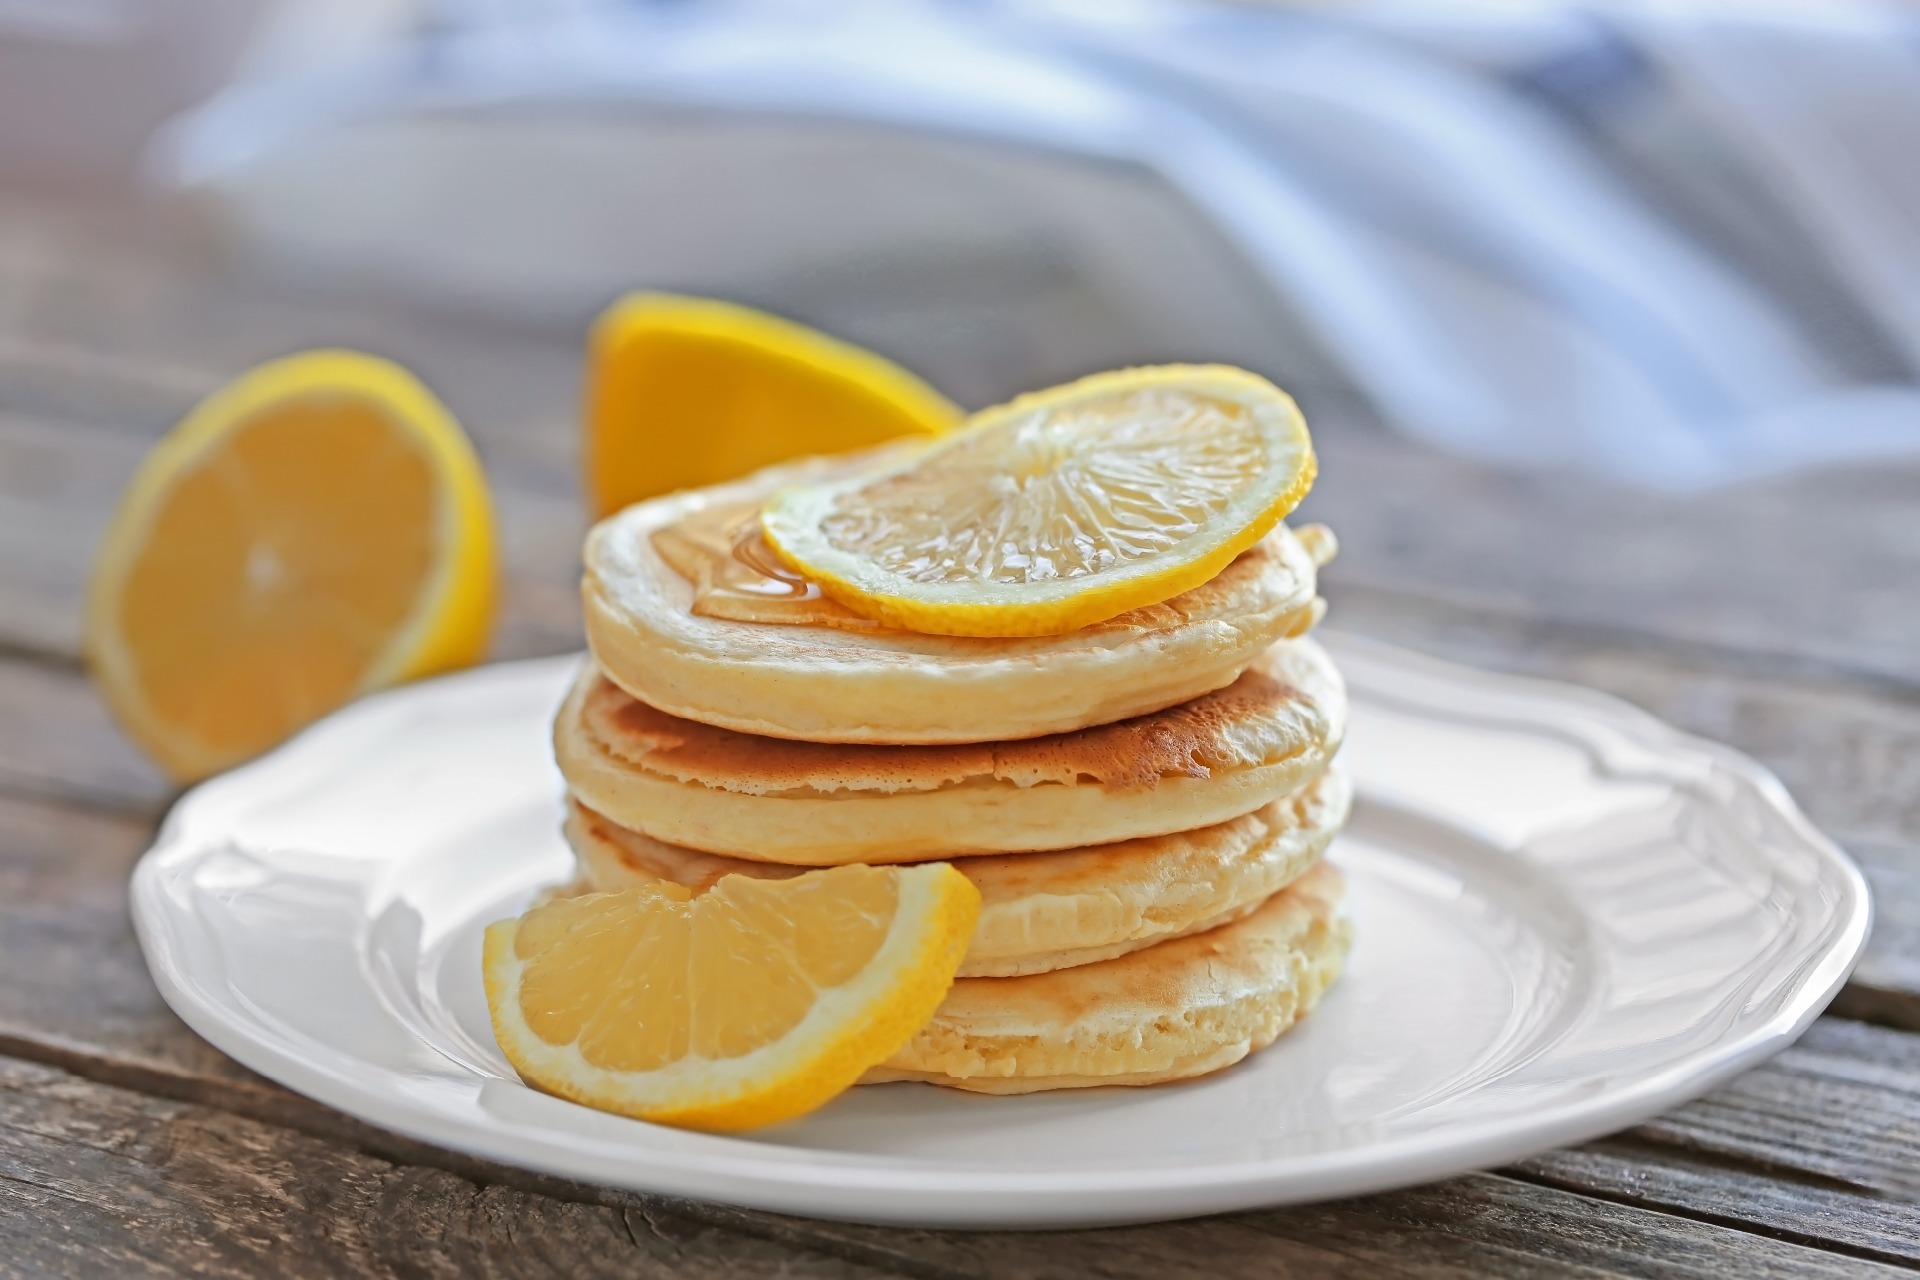 A stack of small, evenly sized pancakes with lemon slices on top.